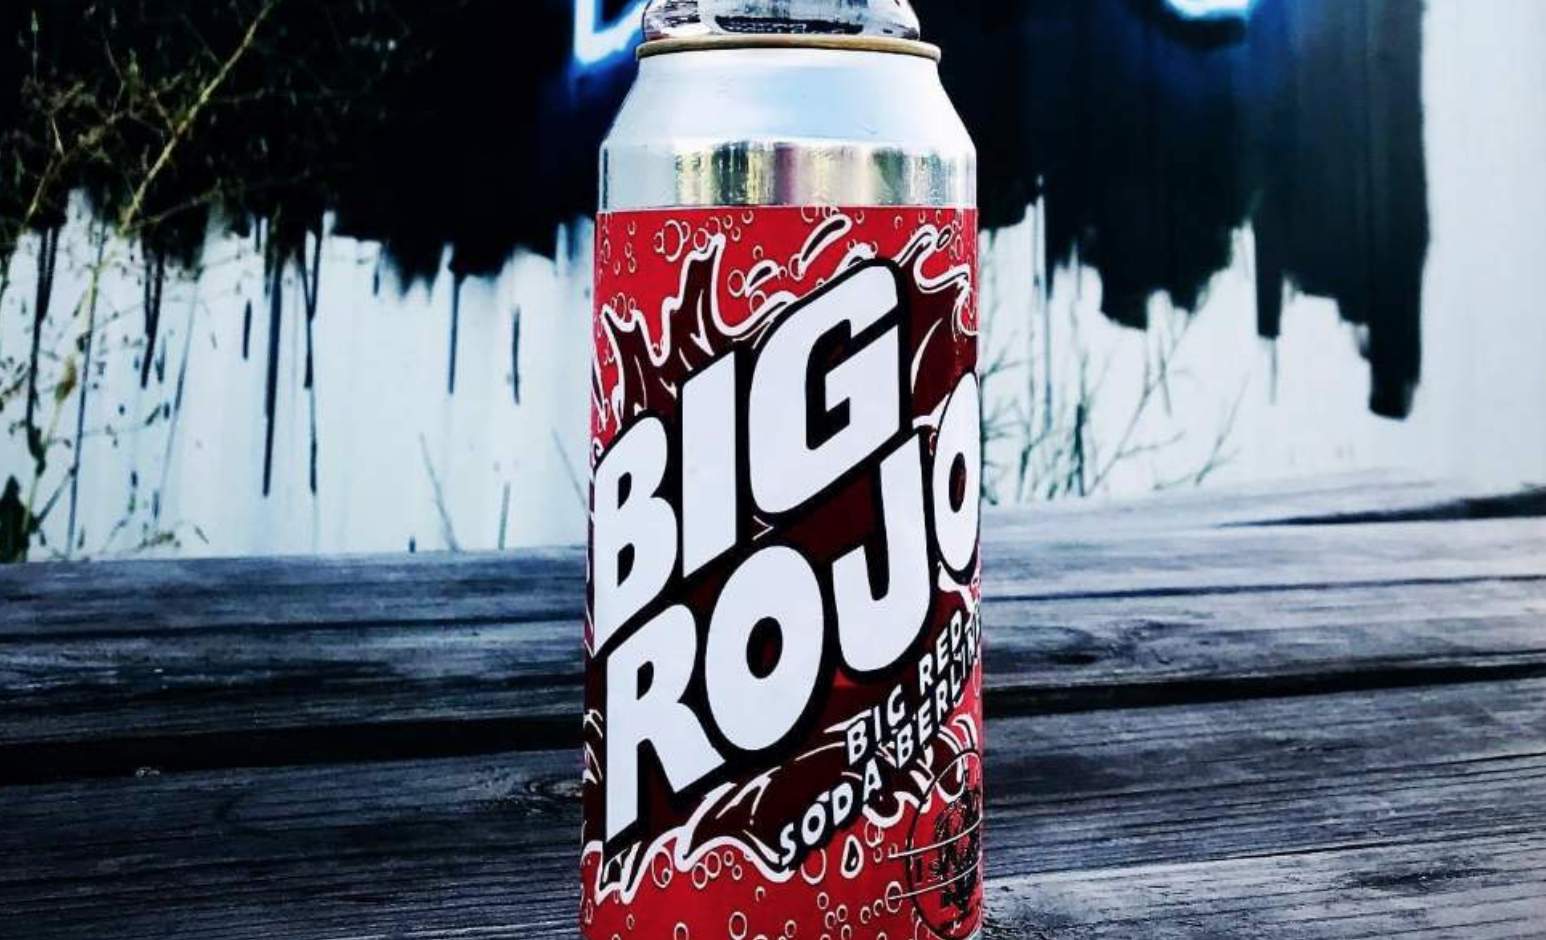 Big Red-flavored beer from San Antonio brewery sells out in 3 minutes